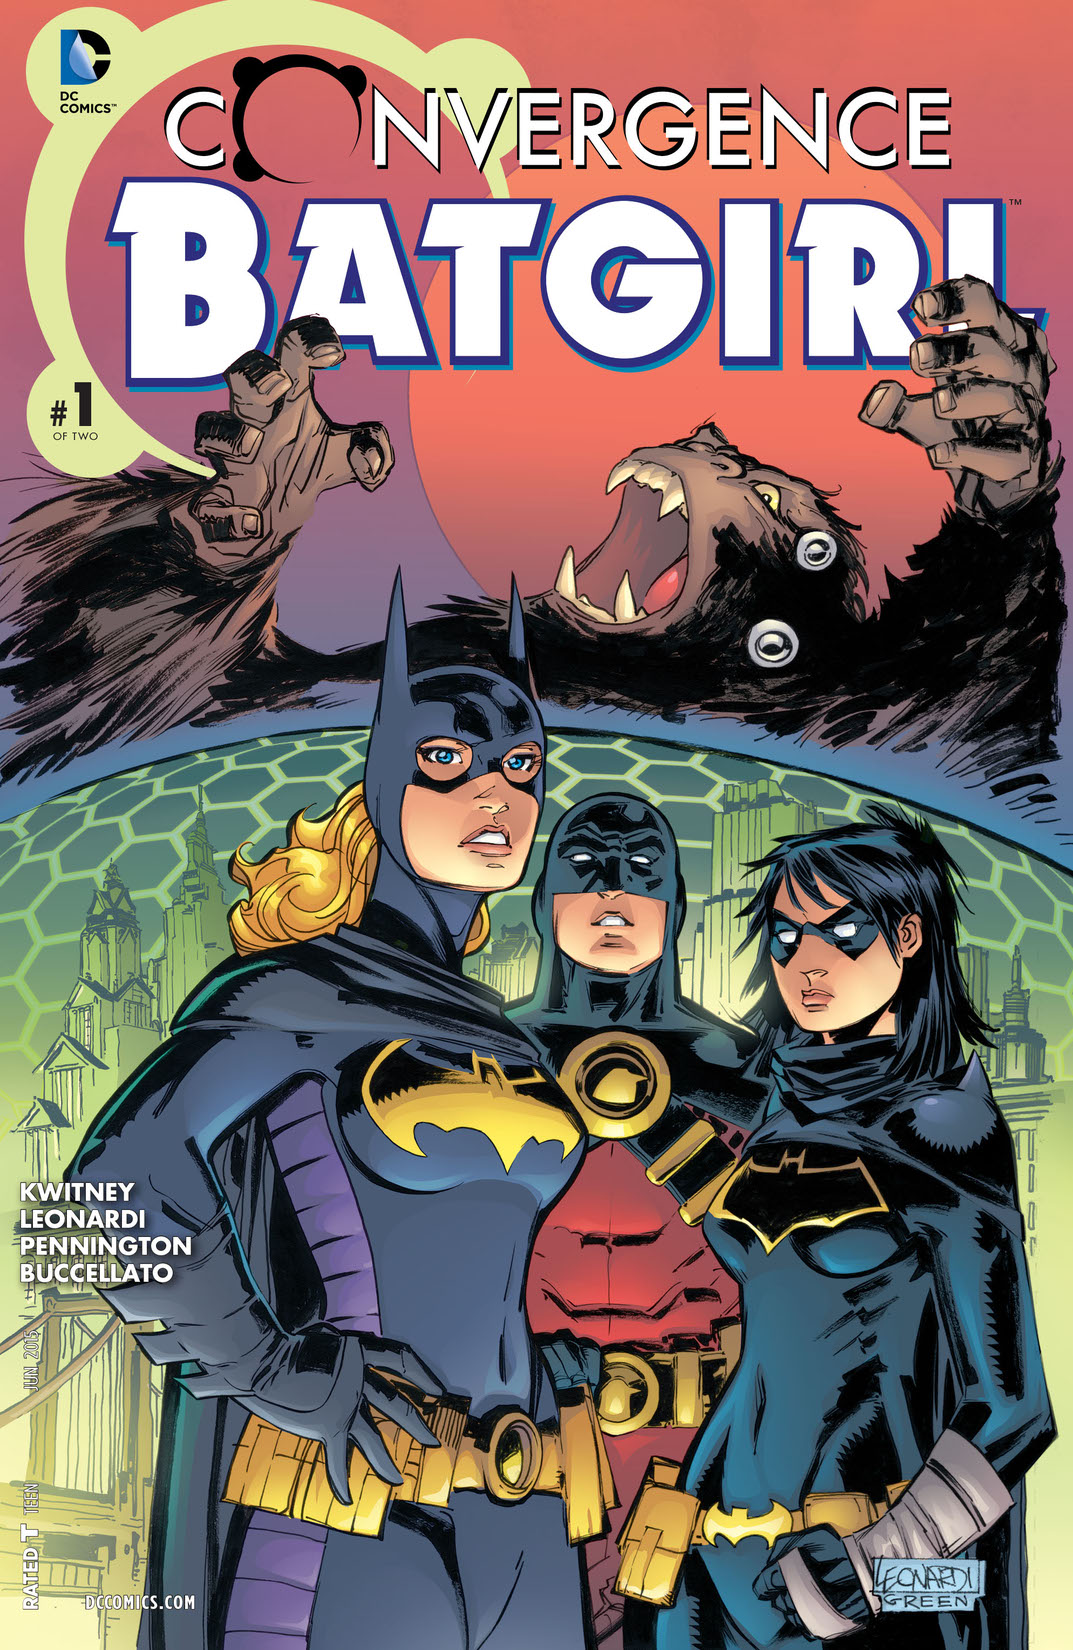 Convergence: Batgirl #1 preview images